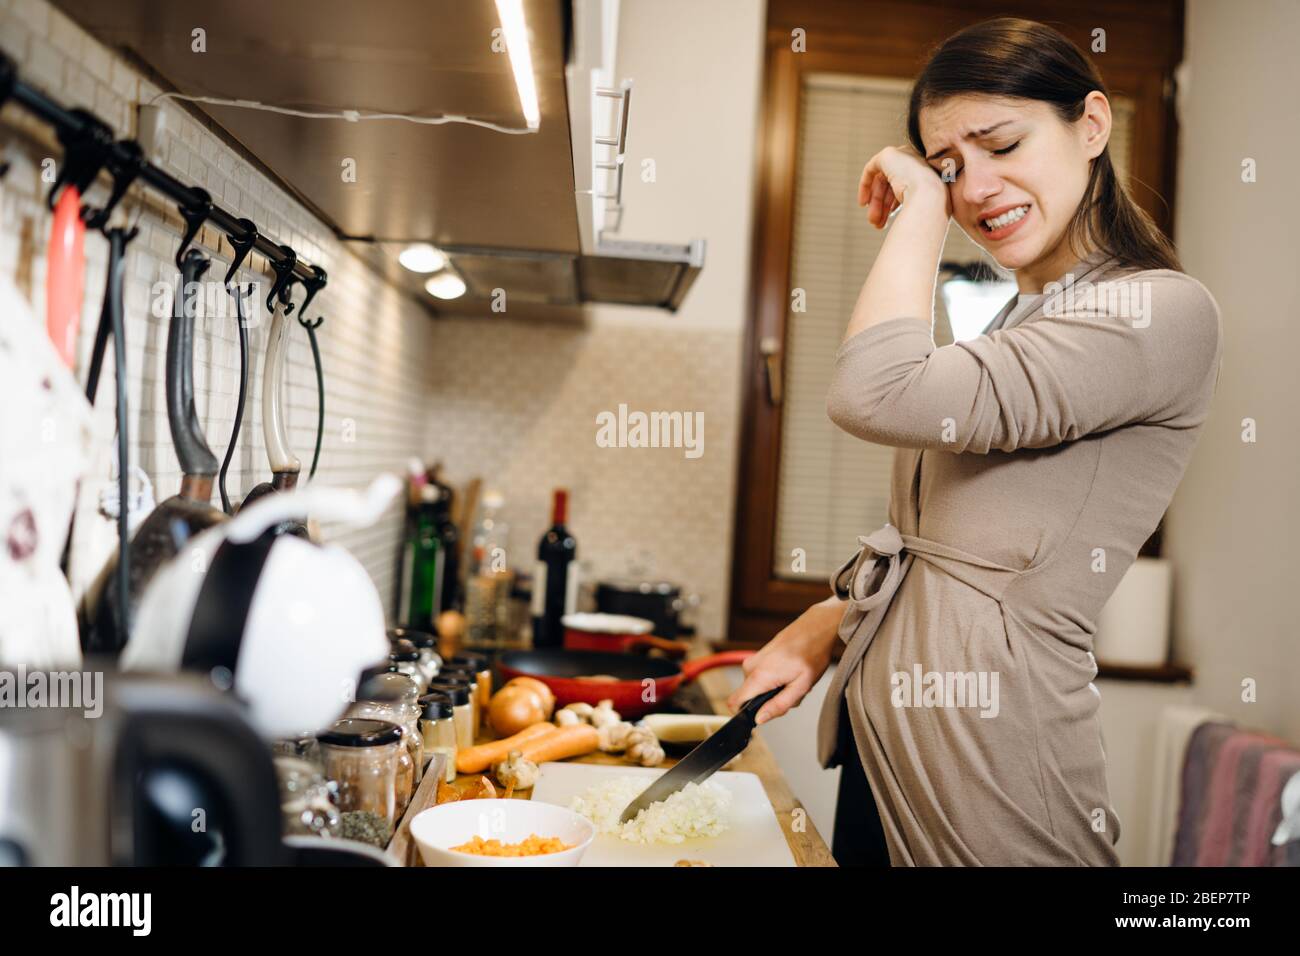 Young housewife beginner cook crying while cutting onion.Slice,dice and chop onion.Stinging eyes and tears when cutting onions to prepare dinner.Shedd Stock Photo